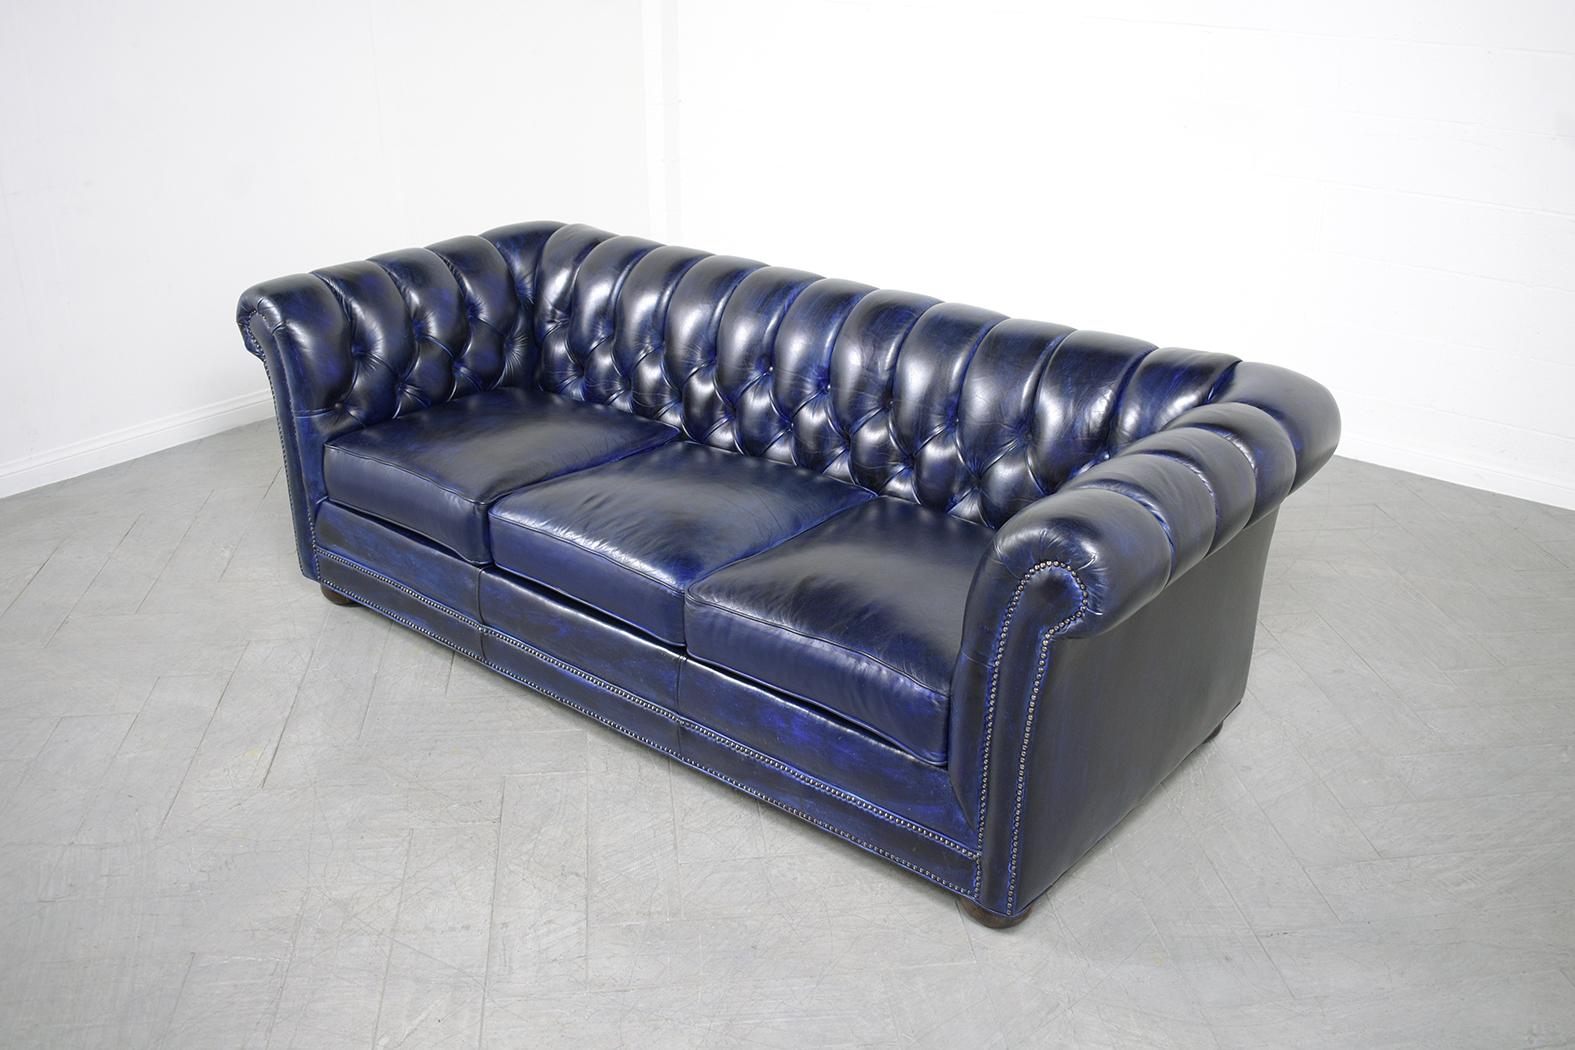 An extraordinary vintage navy blue leather color tufted chesterfield sofa in great condition the frame is crafted out of solid wood and has been completely restored by our professional craftsman team in the house and has been newly dyed in a custom